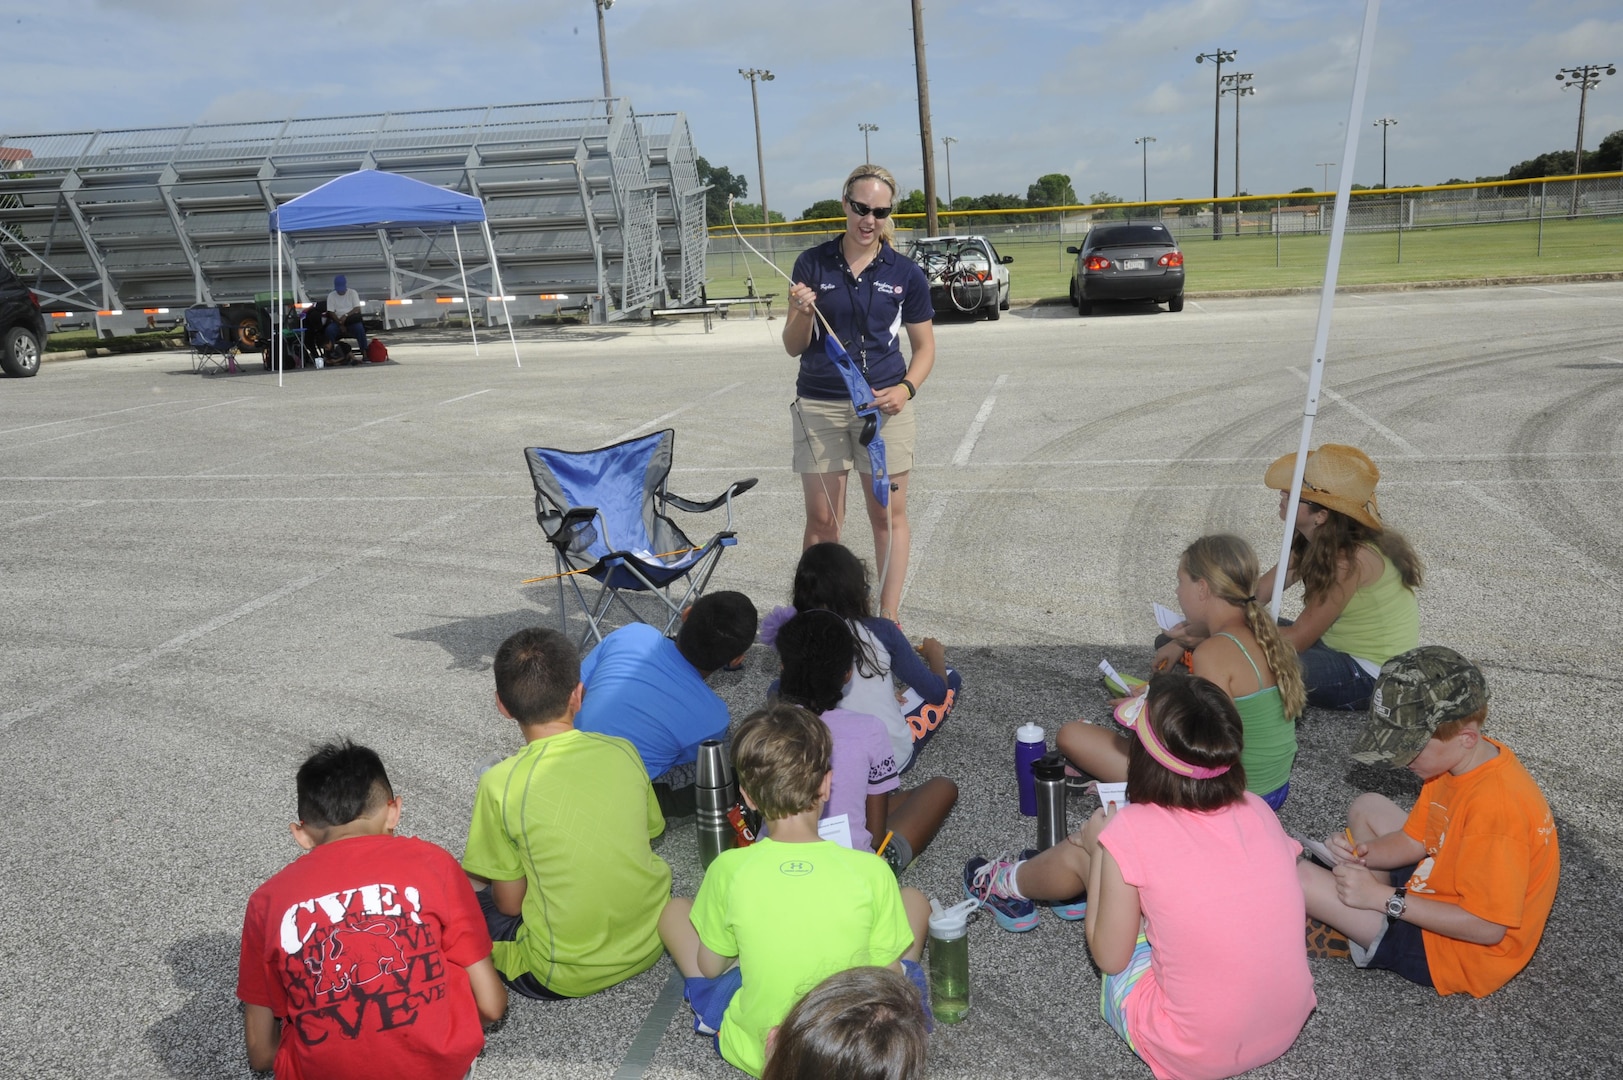 Youth Programs’ summer camp on target for preteens > Joint Base San